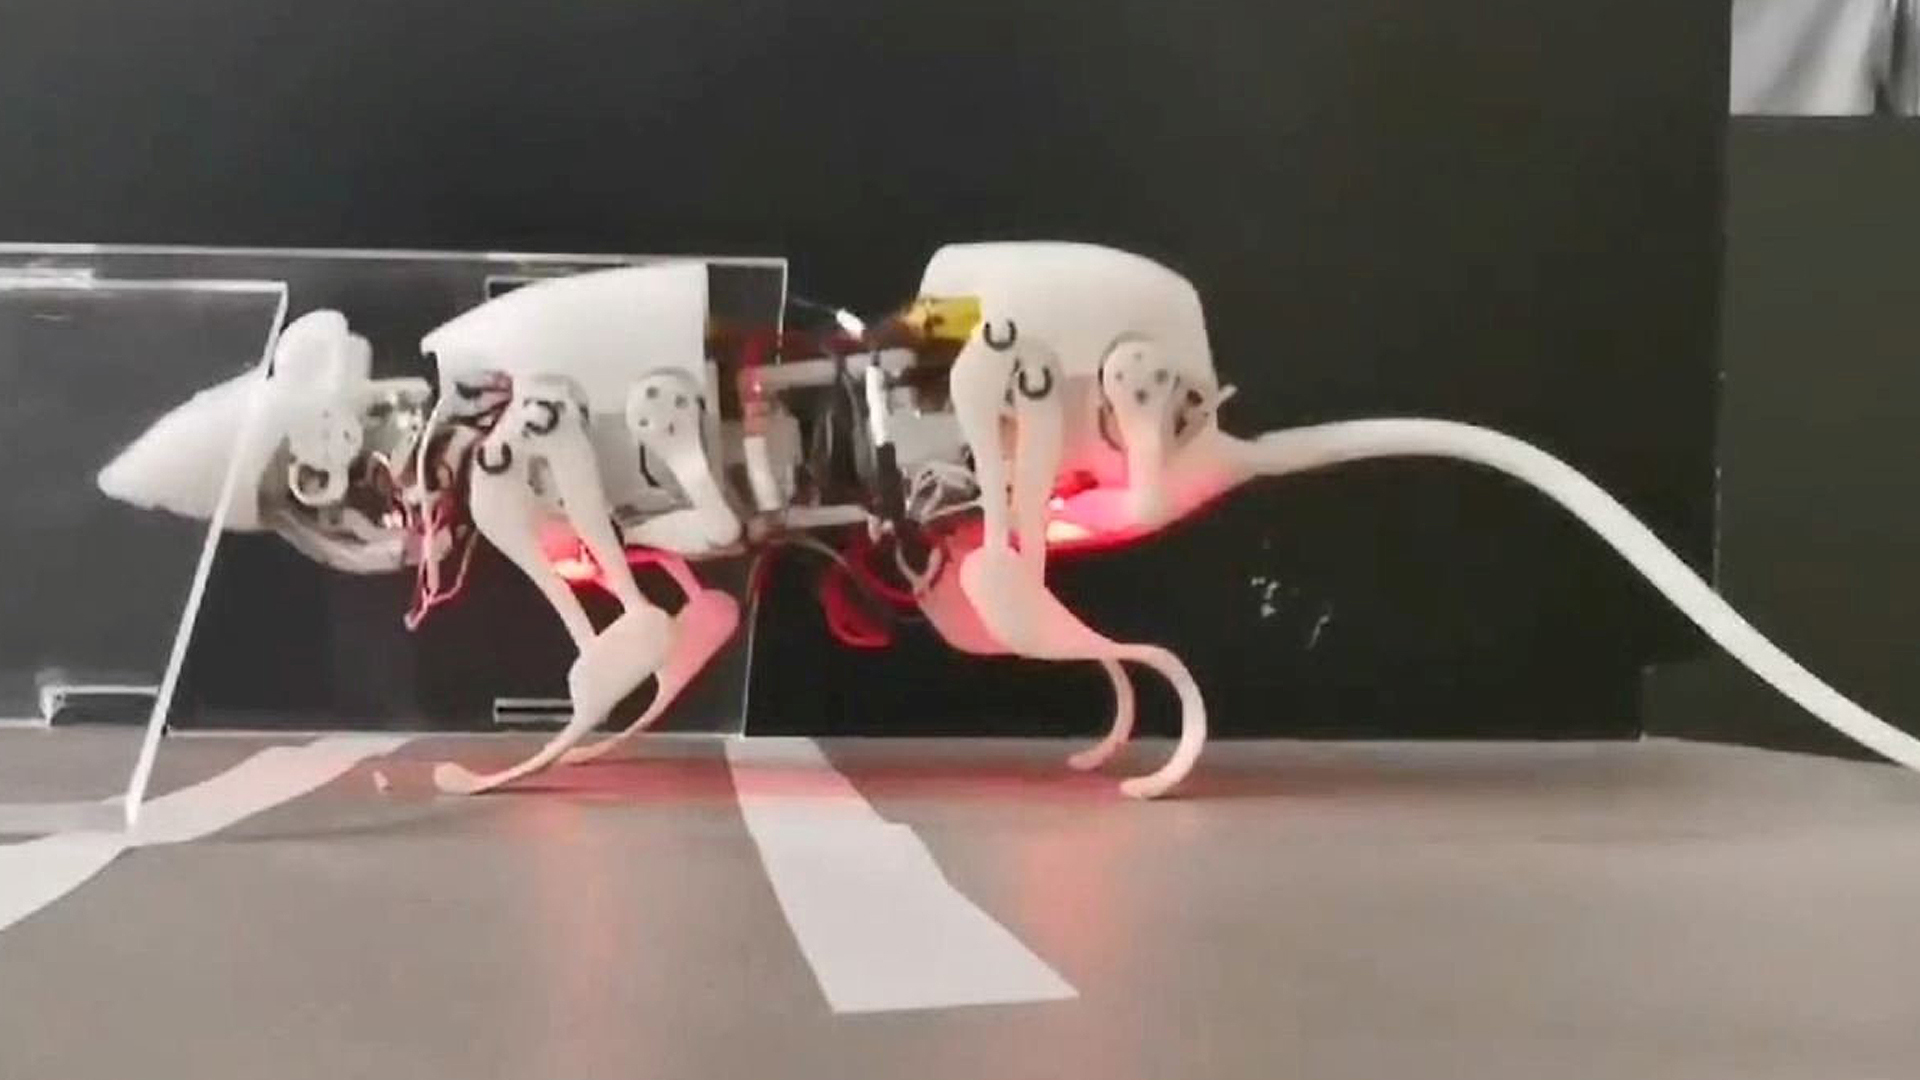 Robot RATS may soon be unleashed to search for survivors at disaster sites